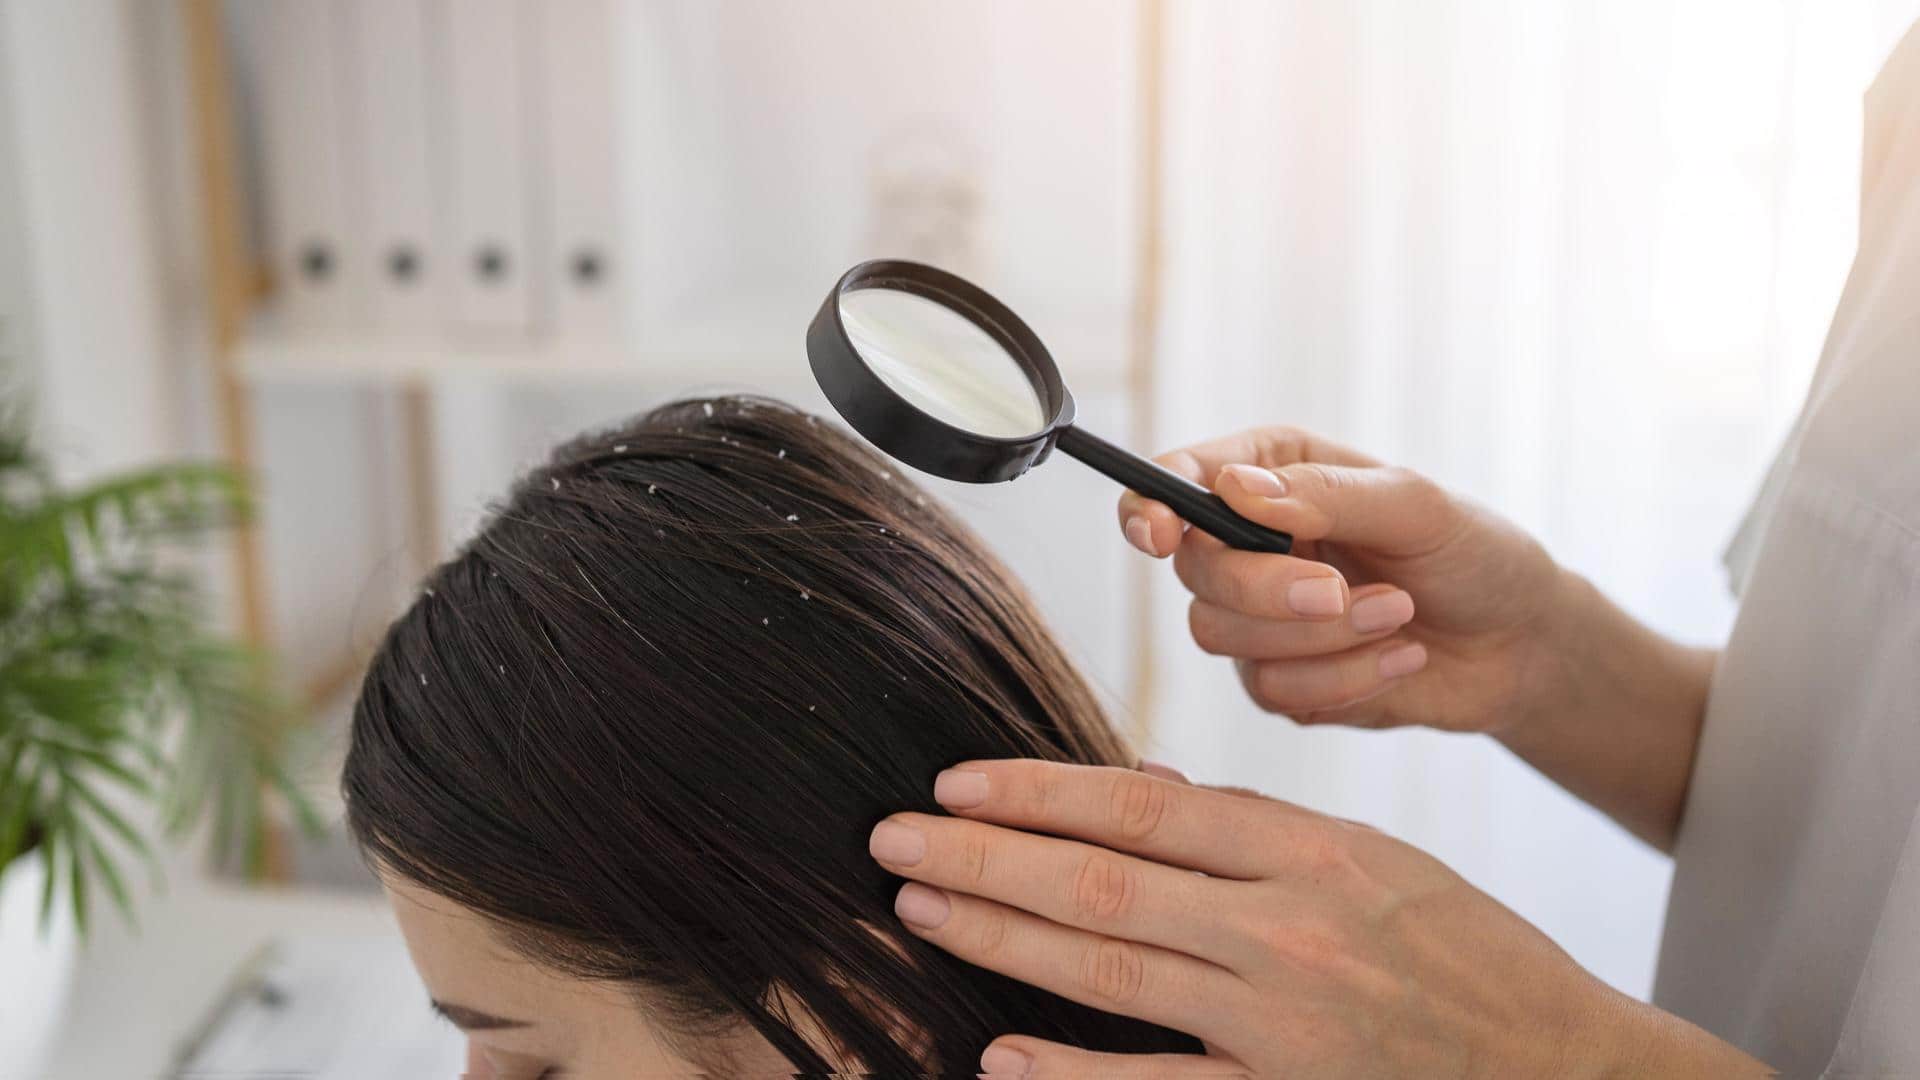 Troubled with head lice? Remove them using these simple remedies